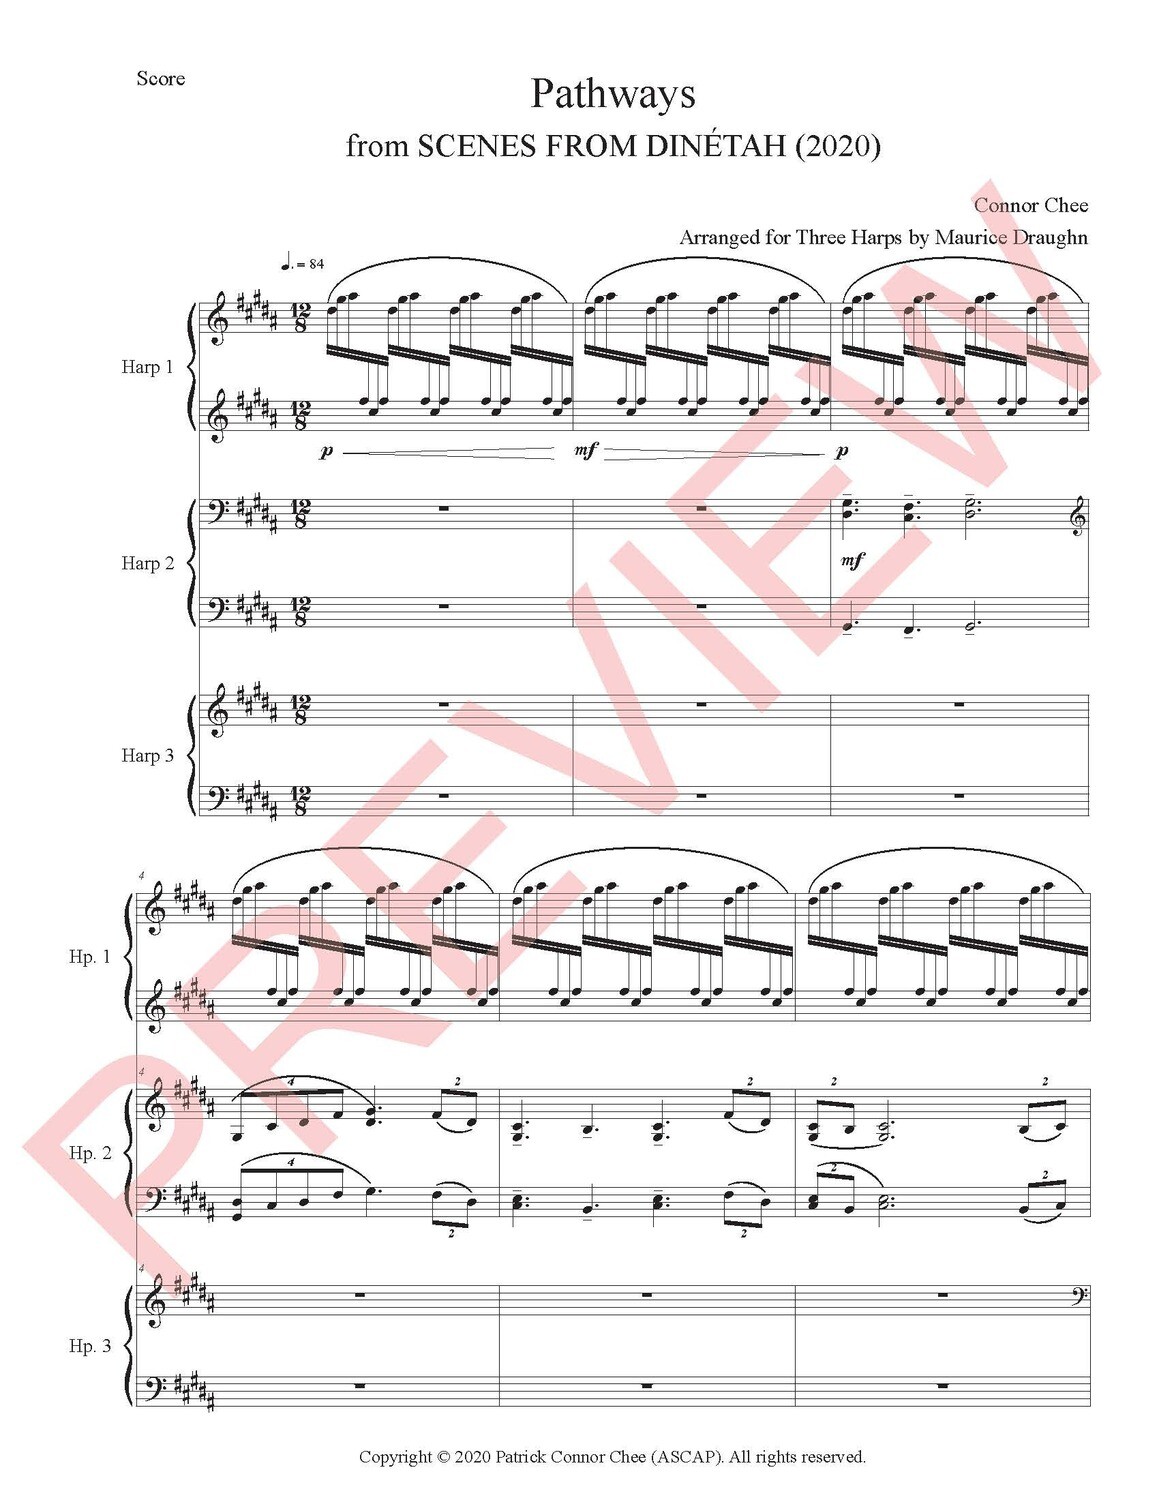 Digital Sheet Music - Pathways (Arranged for 3 Harps) (Connor Chee)